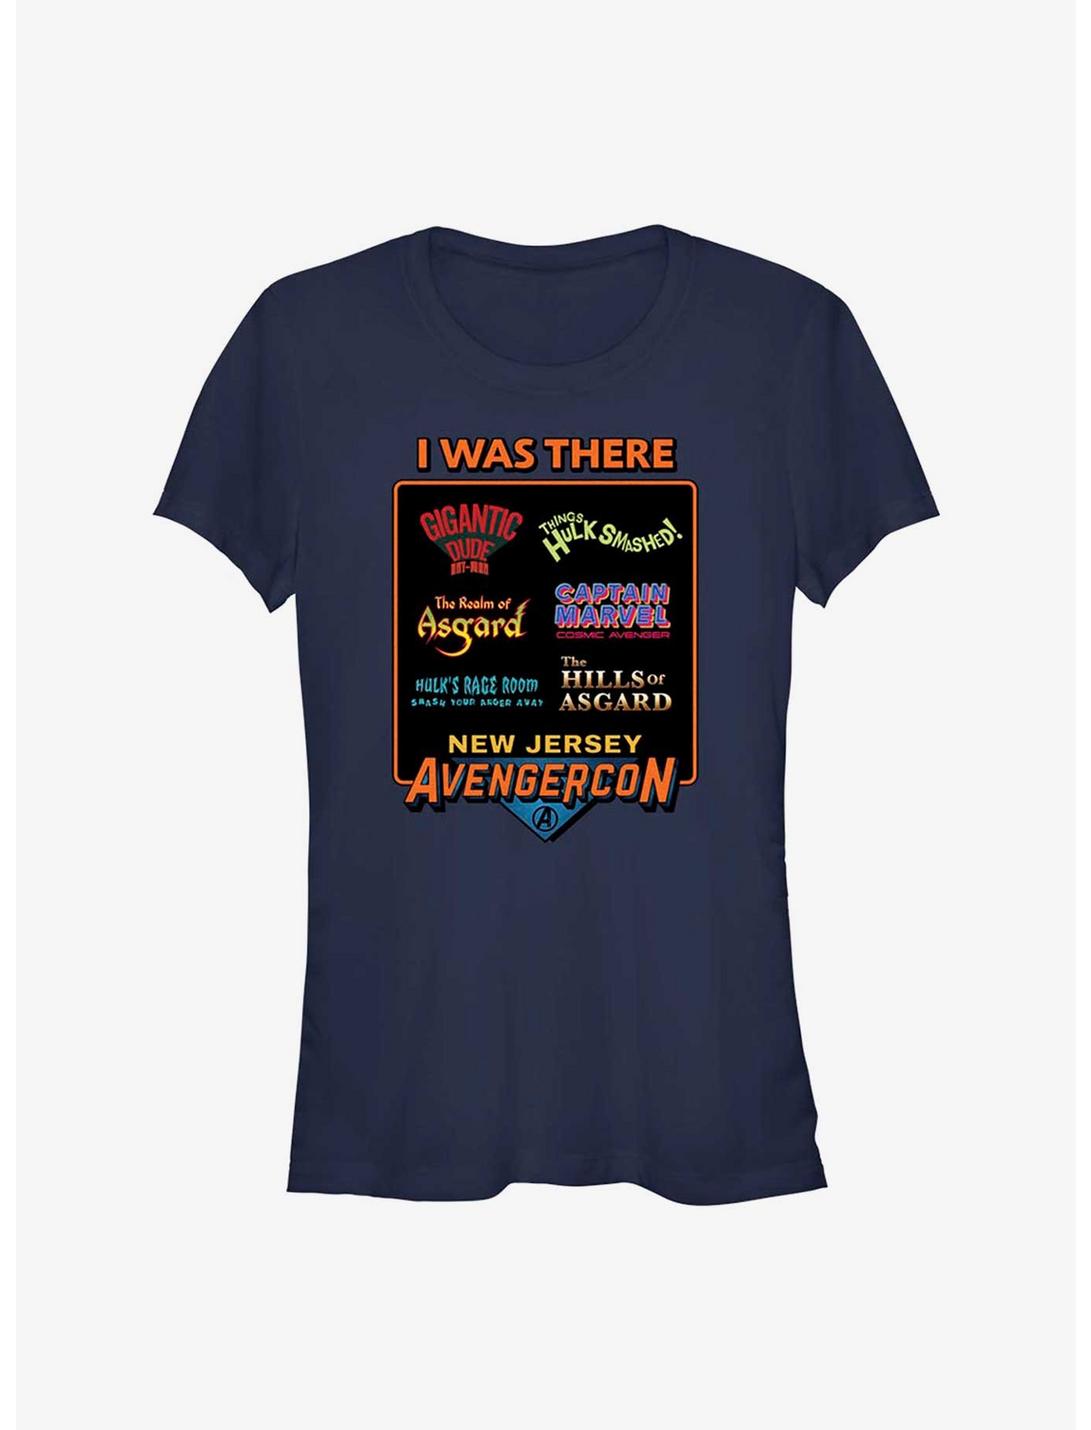 Marvel Ms. Marvel Avengerscon I Was There Girls T-Shirt, NAVY, hi-res